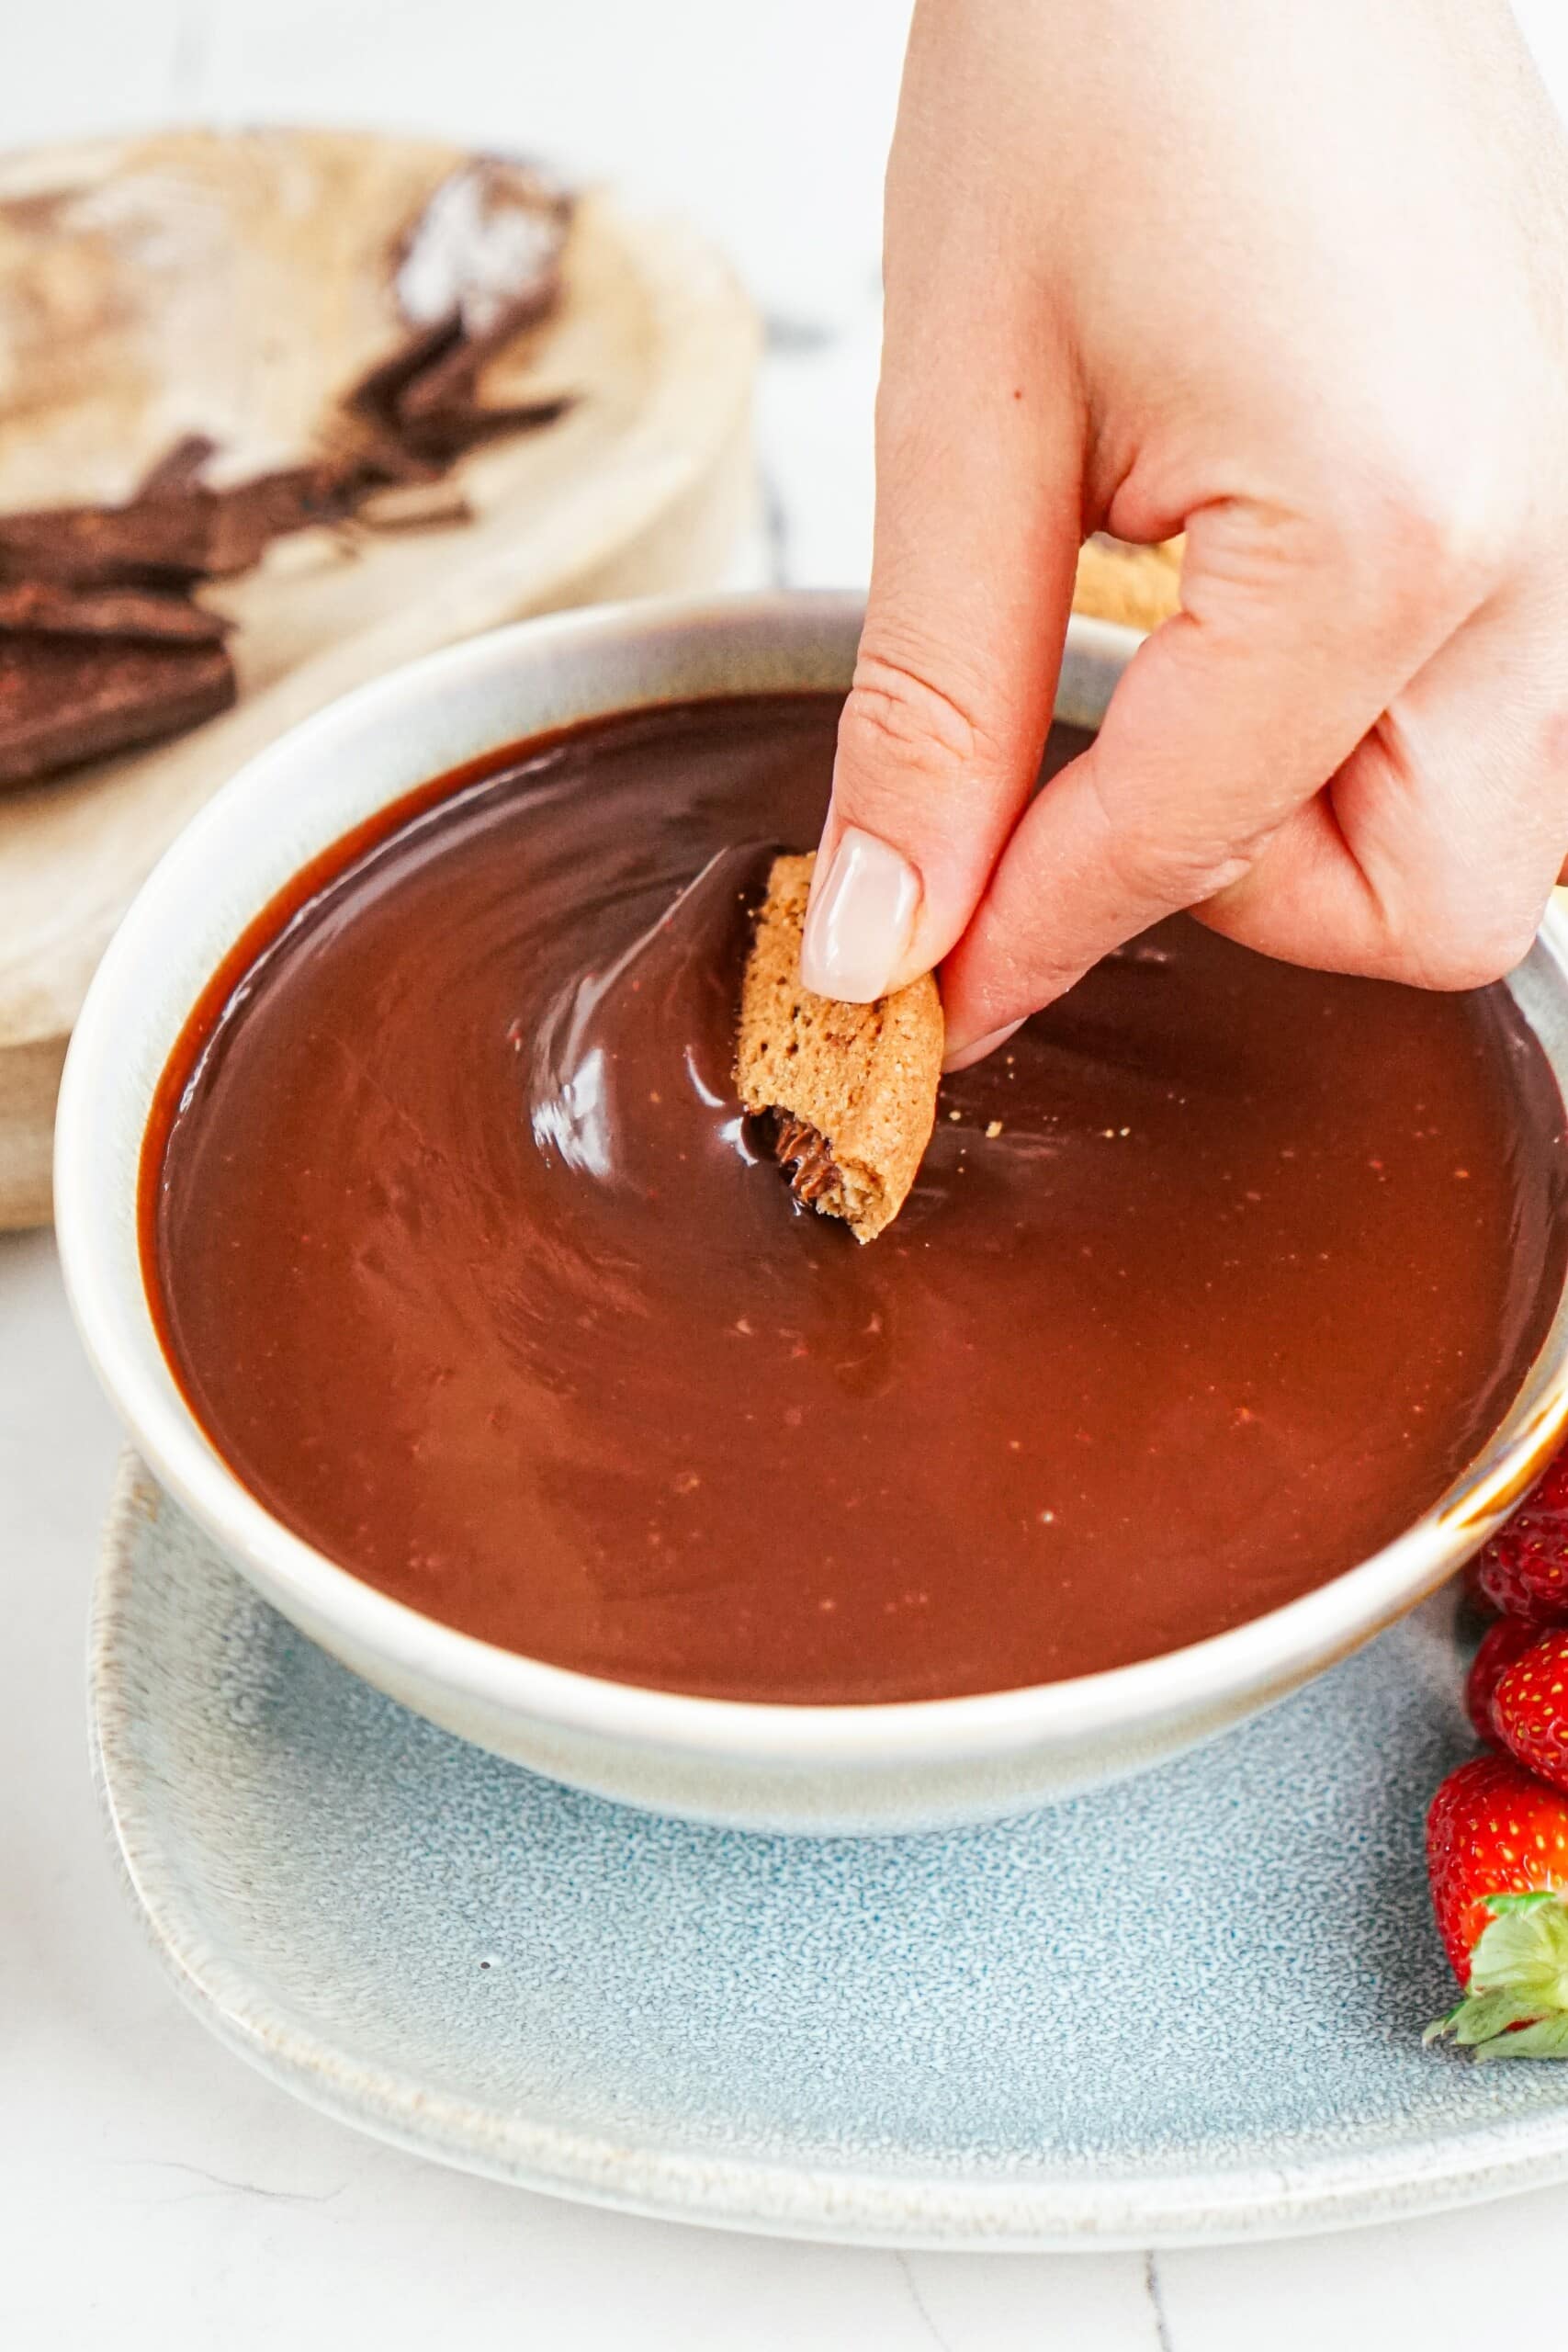 woman's hand dipping a piece of cookie into a bowl of chocolate.